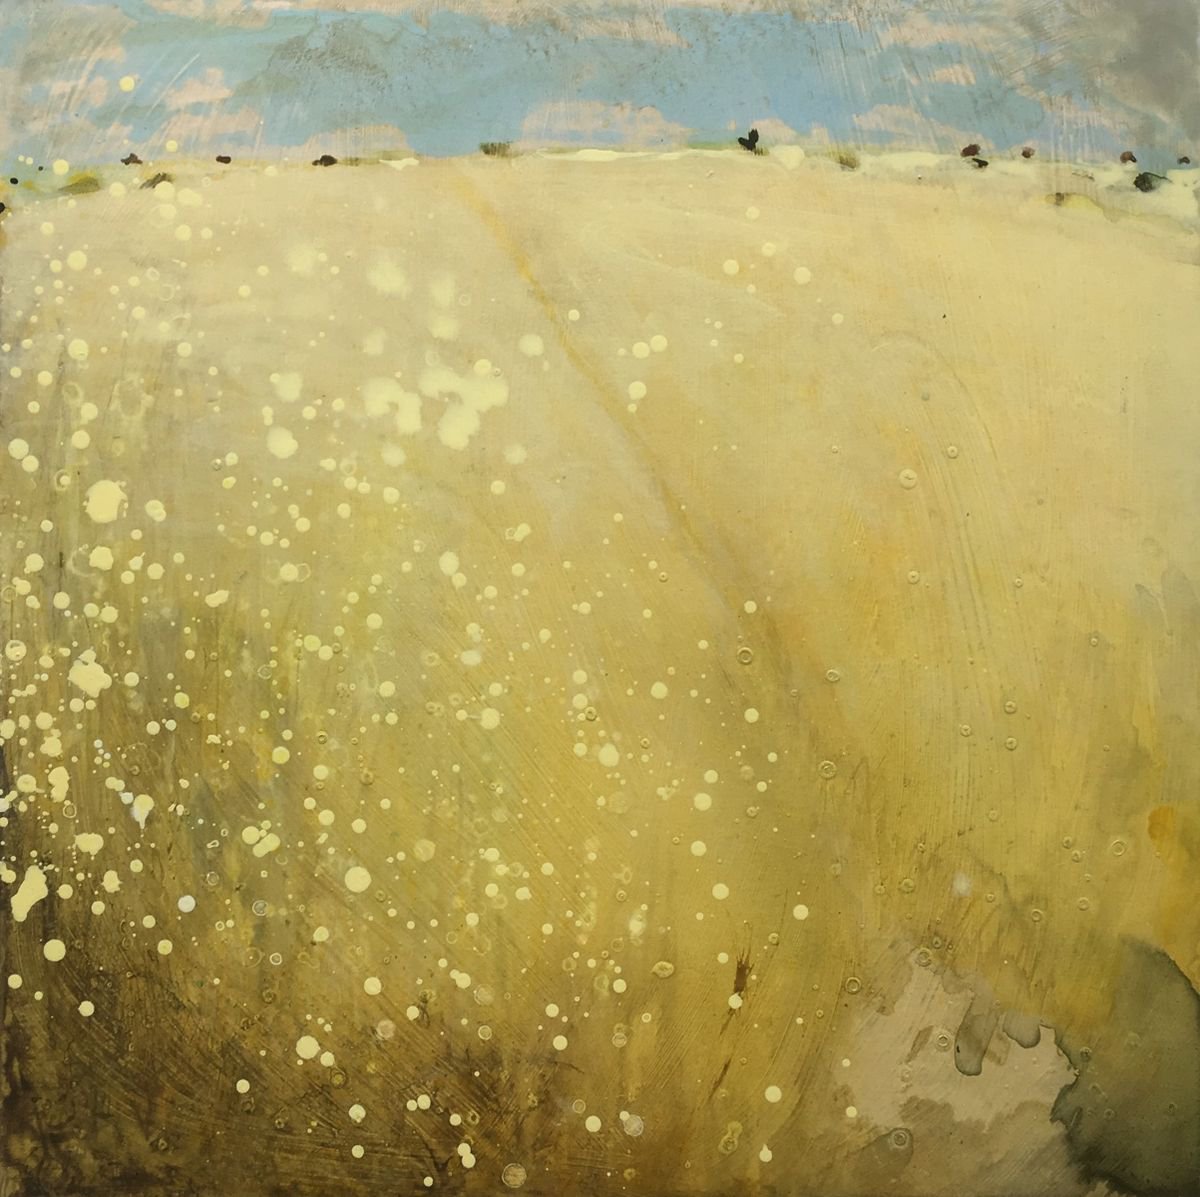 Sun-baked fields by Nichola Campbell